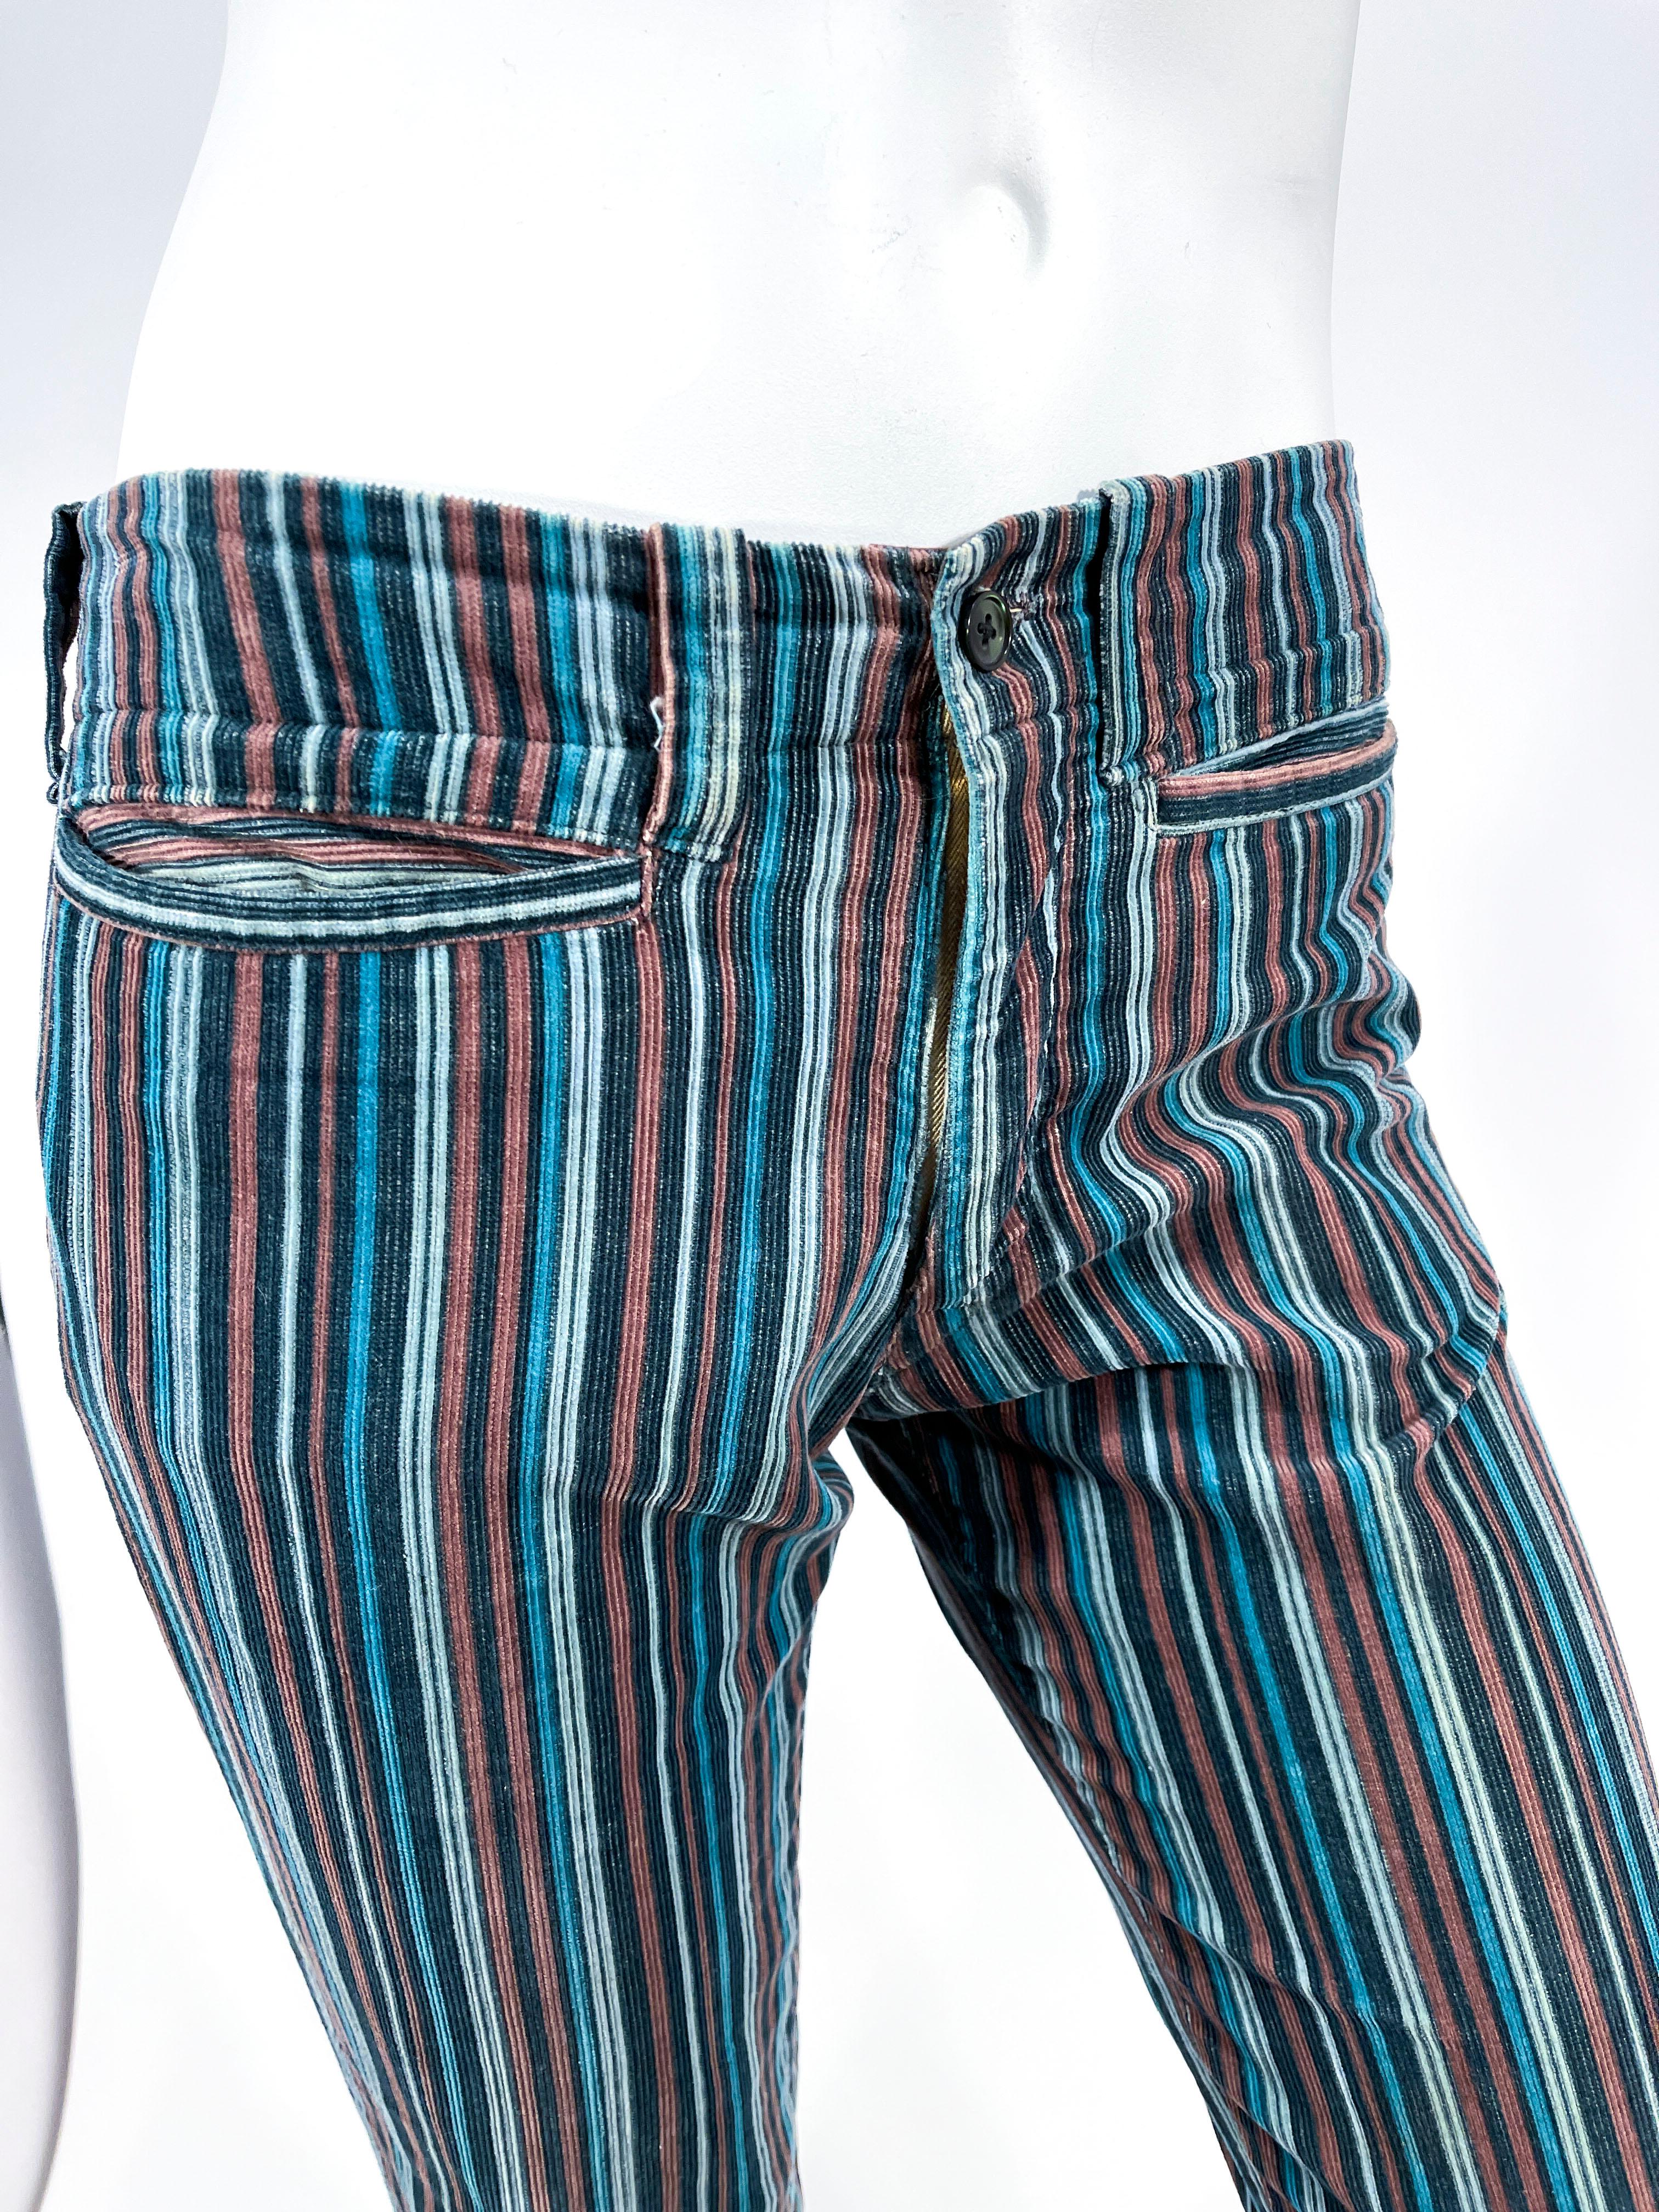 1979 Andrew Yiannakou corduroy featuring vertical stripes in teal, tan, and light blue. The low rise hip hugger waist has two front pockets, matching belt loops, and metal zip fly. Note these pants are meant to be worn on the hip